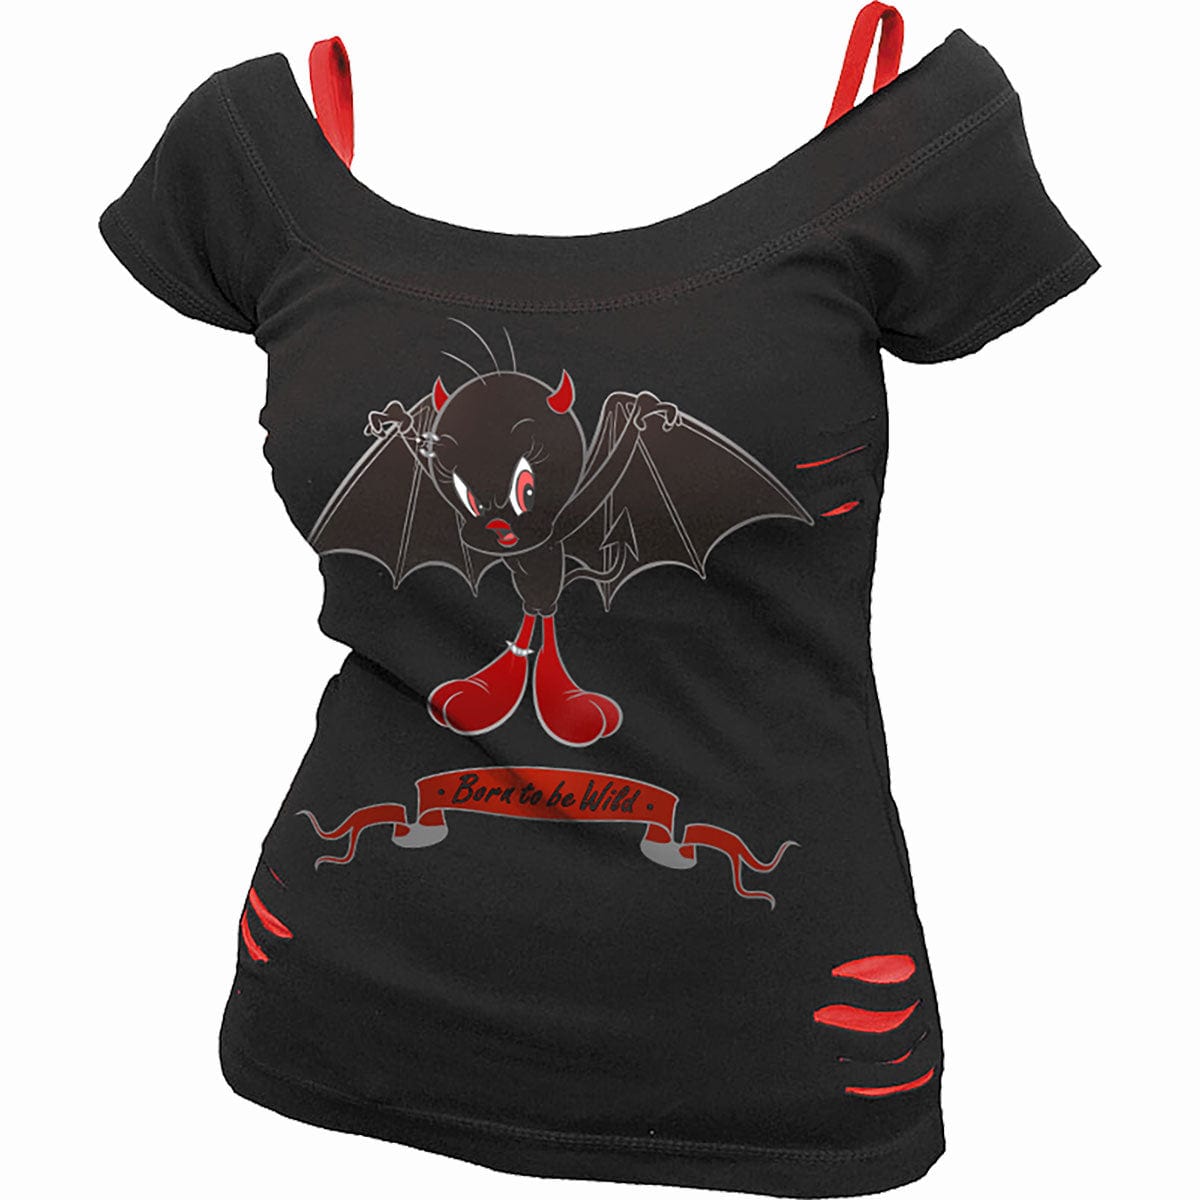 TWEETY - BORN TO BE WILD - 2in1 Red Ripped Top Black